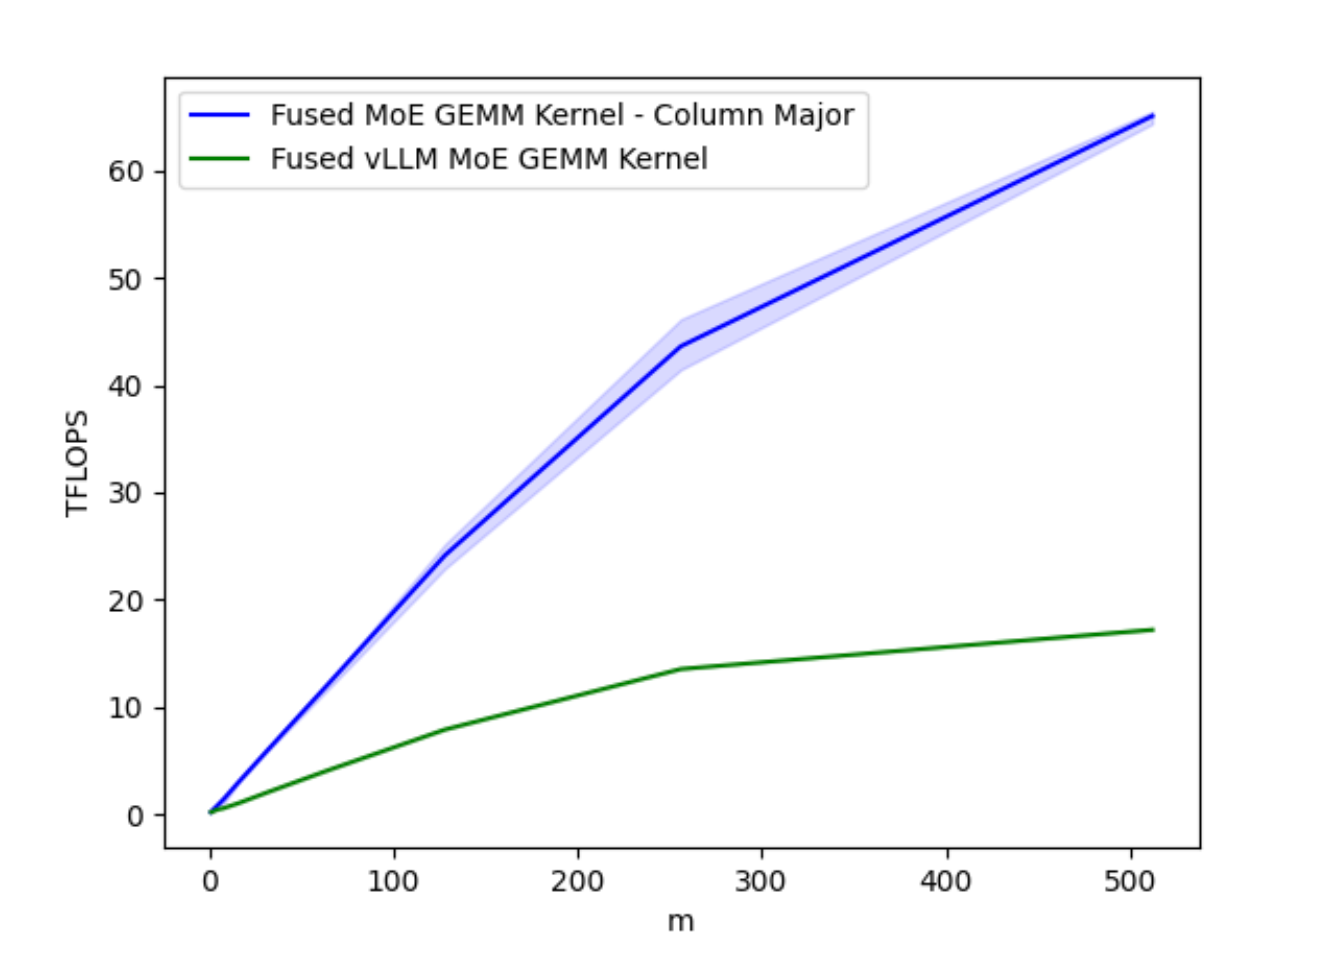 Figure 1A. Optimized Fused MoE GEMM Kernel TFLOPs on A100 for varying Batch Sizes M